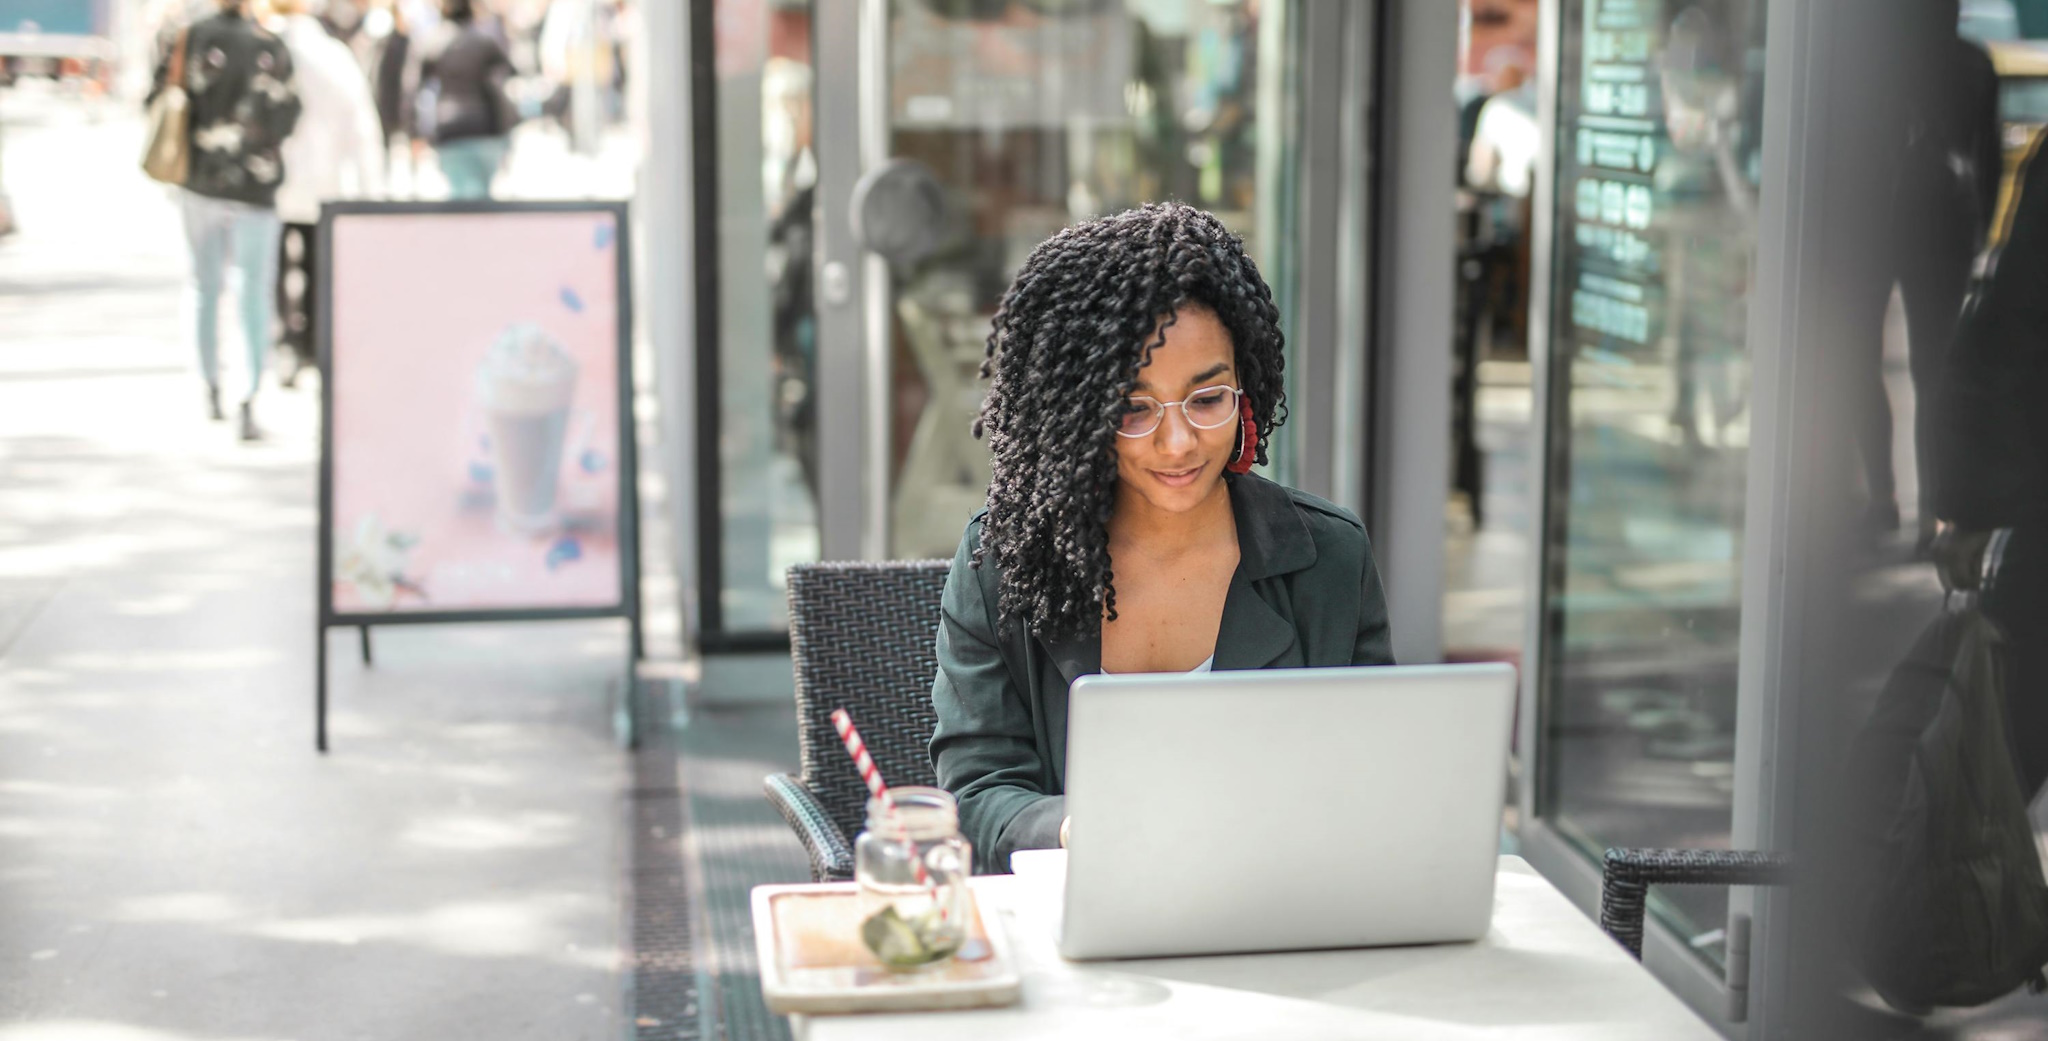 A young black woman wearing glasses sits outside a cafe working on her laptop. Her hair is in long curly ringlets and she's smiling.